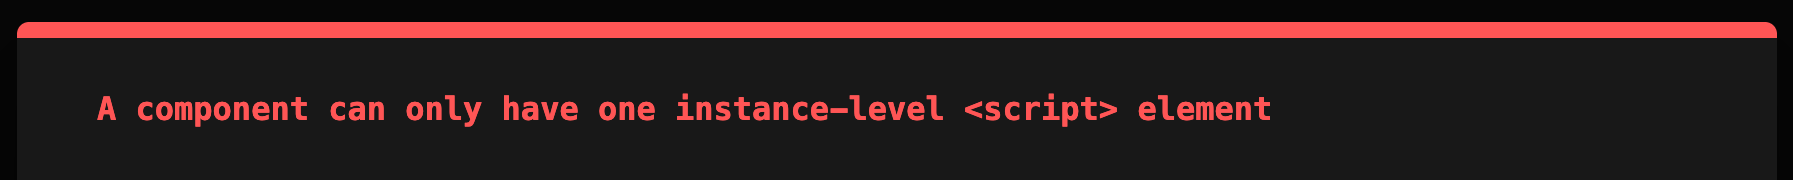 SvelteKit error message reading, "A component can only have one instance-level  element"